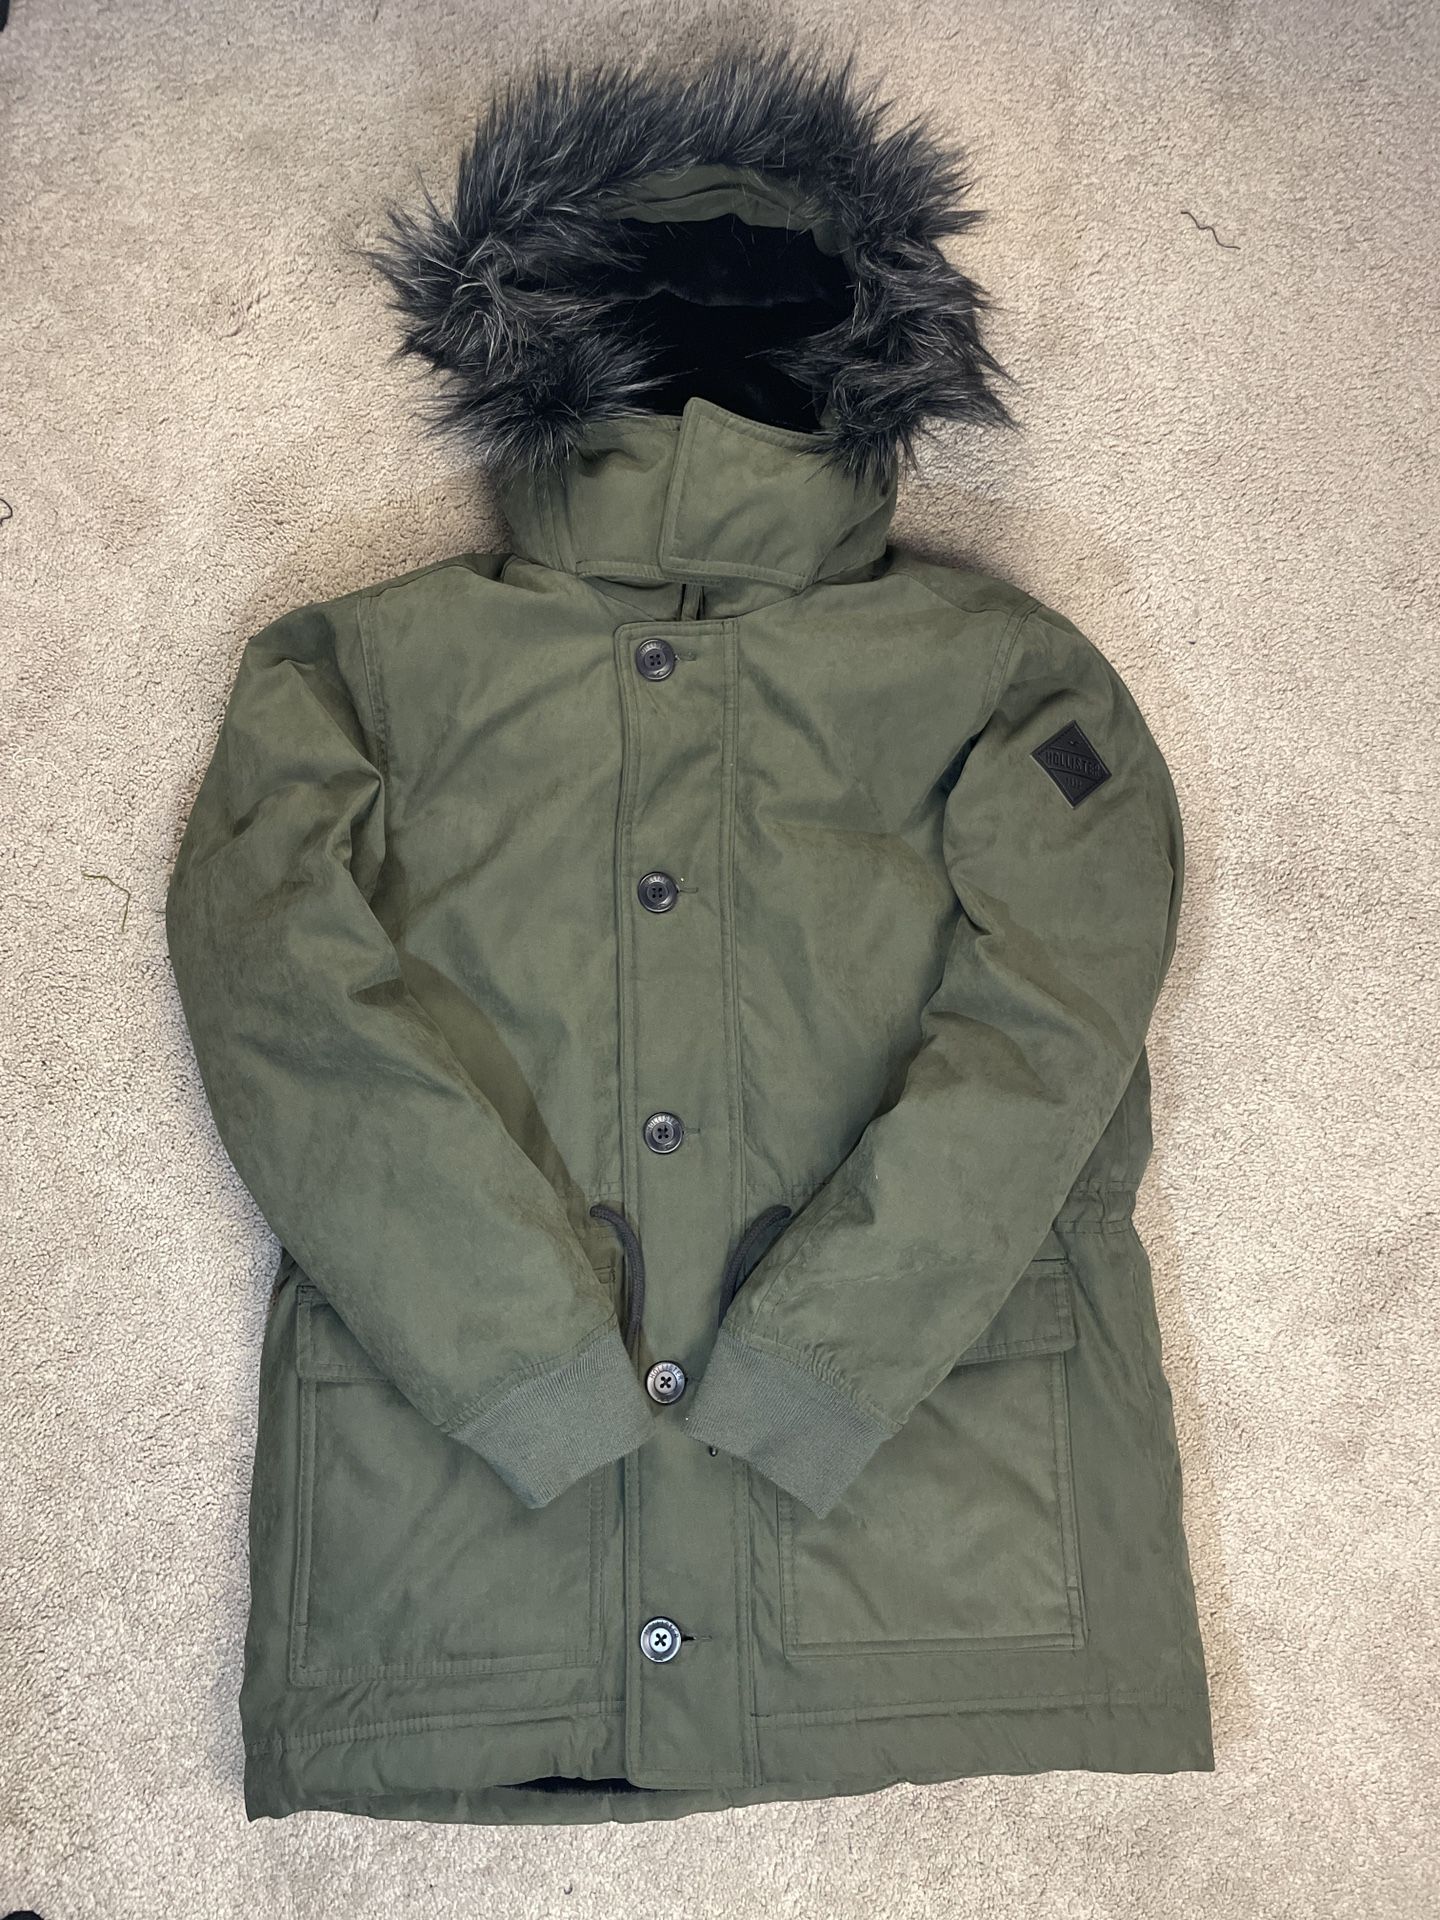 Hollister Small Olive Green All Weather Winter Parka